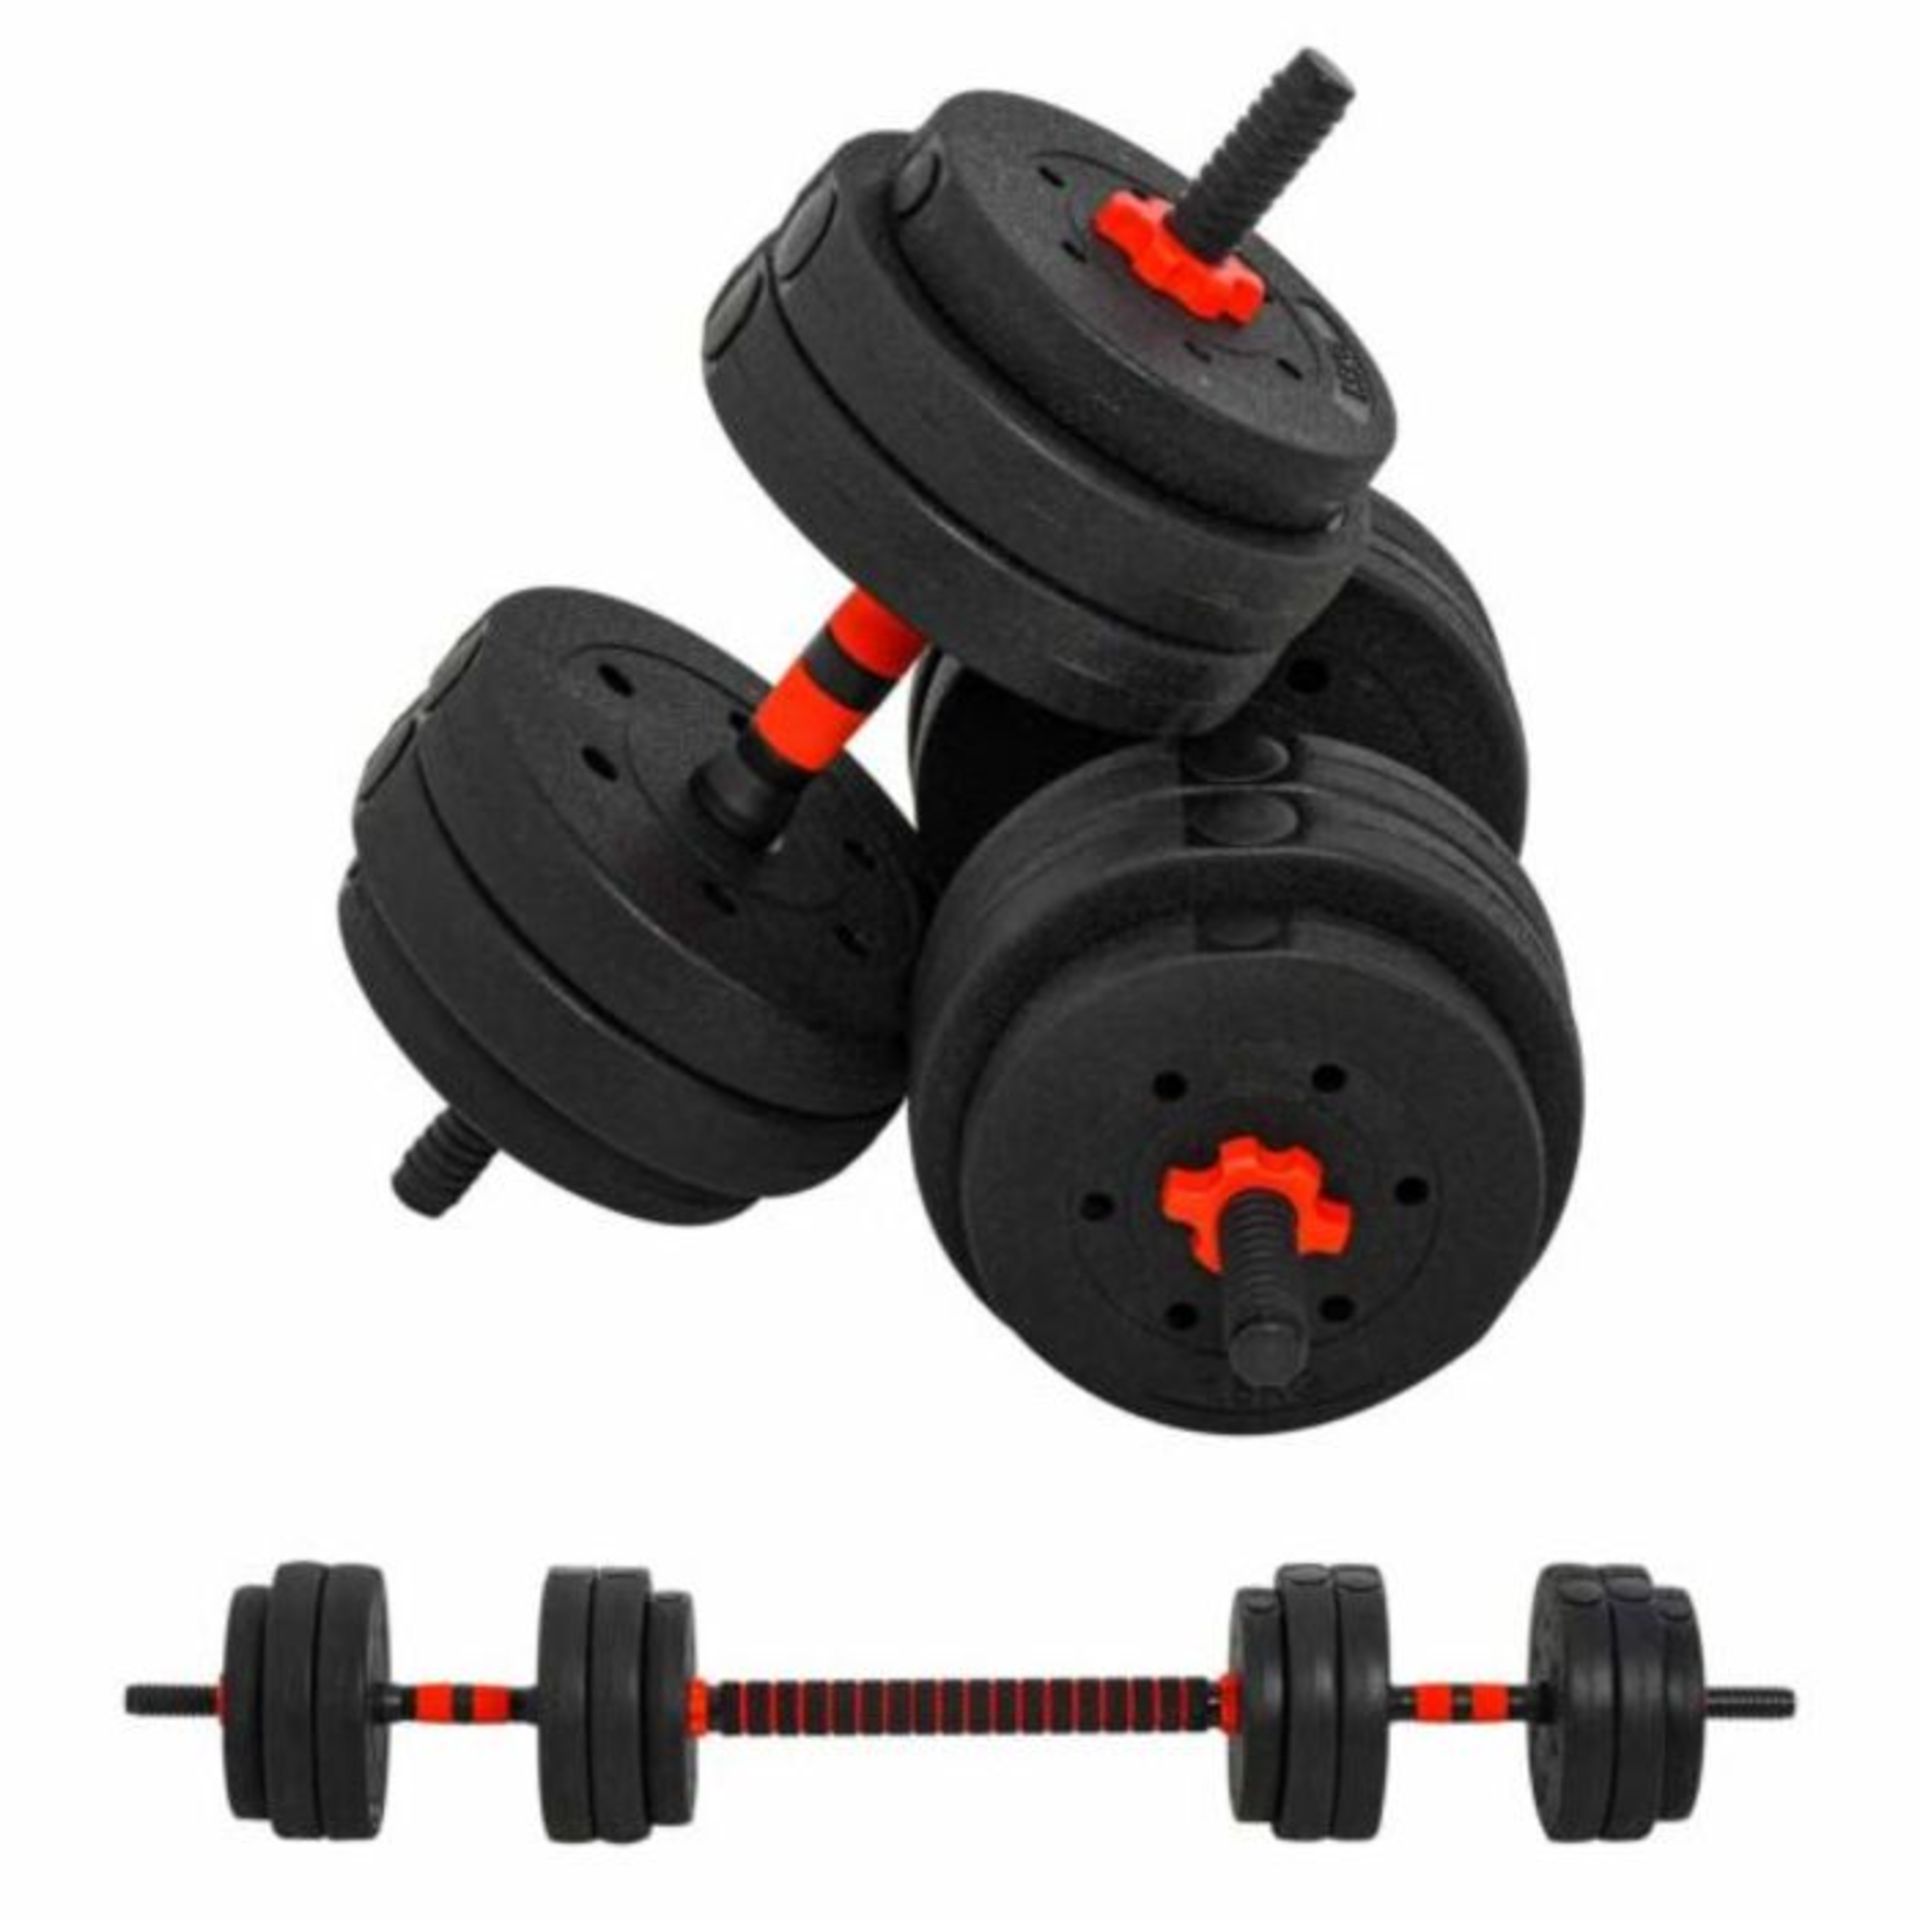 10x Hom Com 2 in1 Barbell/Dumb bell 30kg weight set, new and boxed, Similar sets retail at around ?